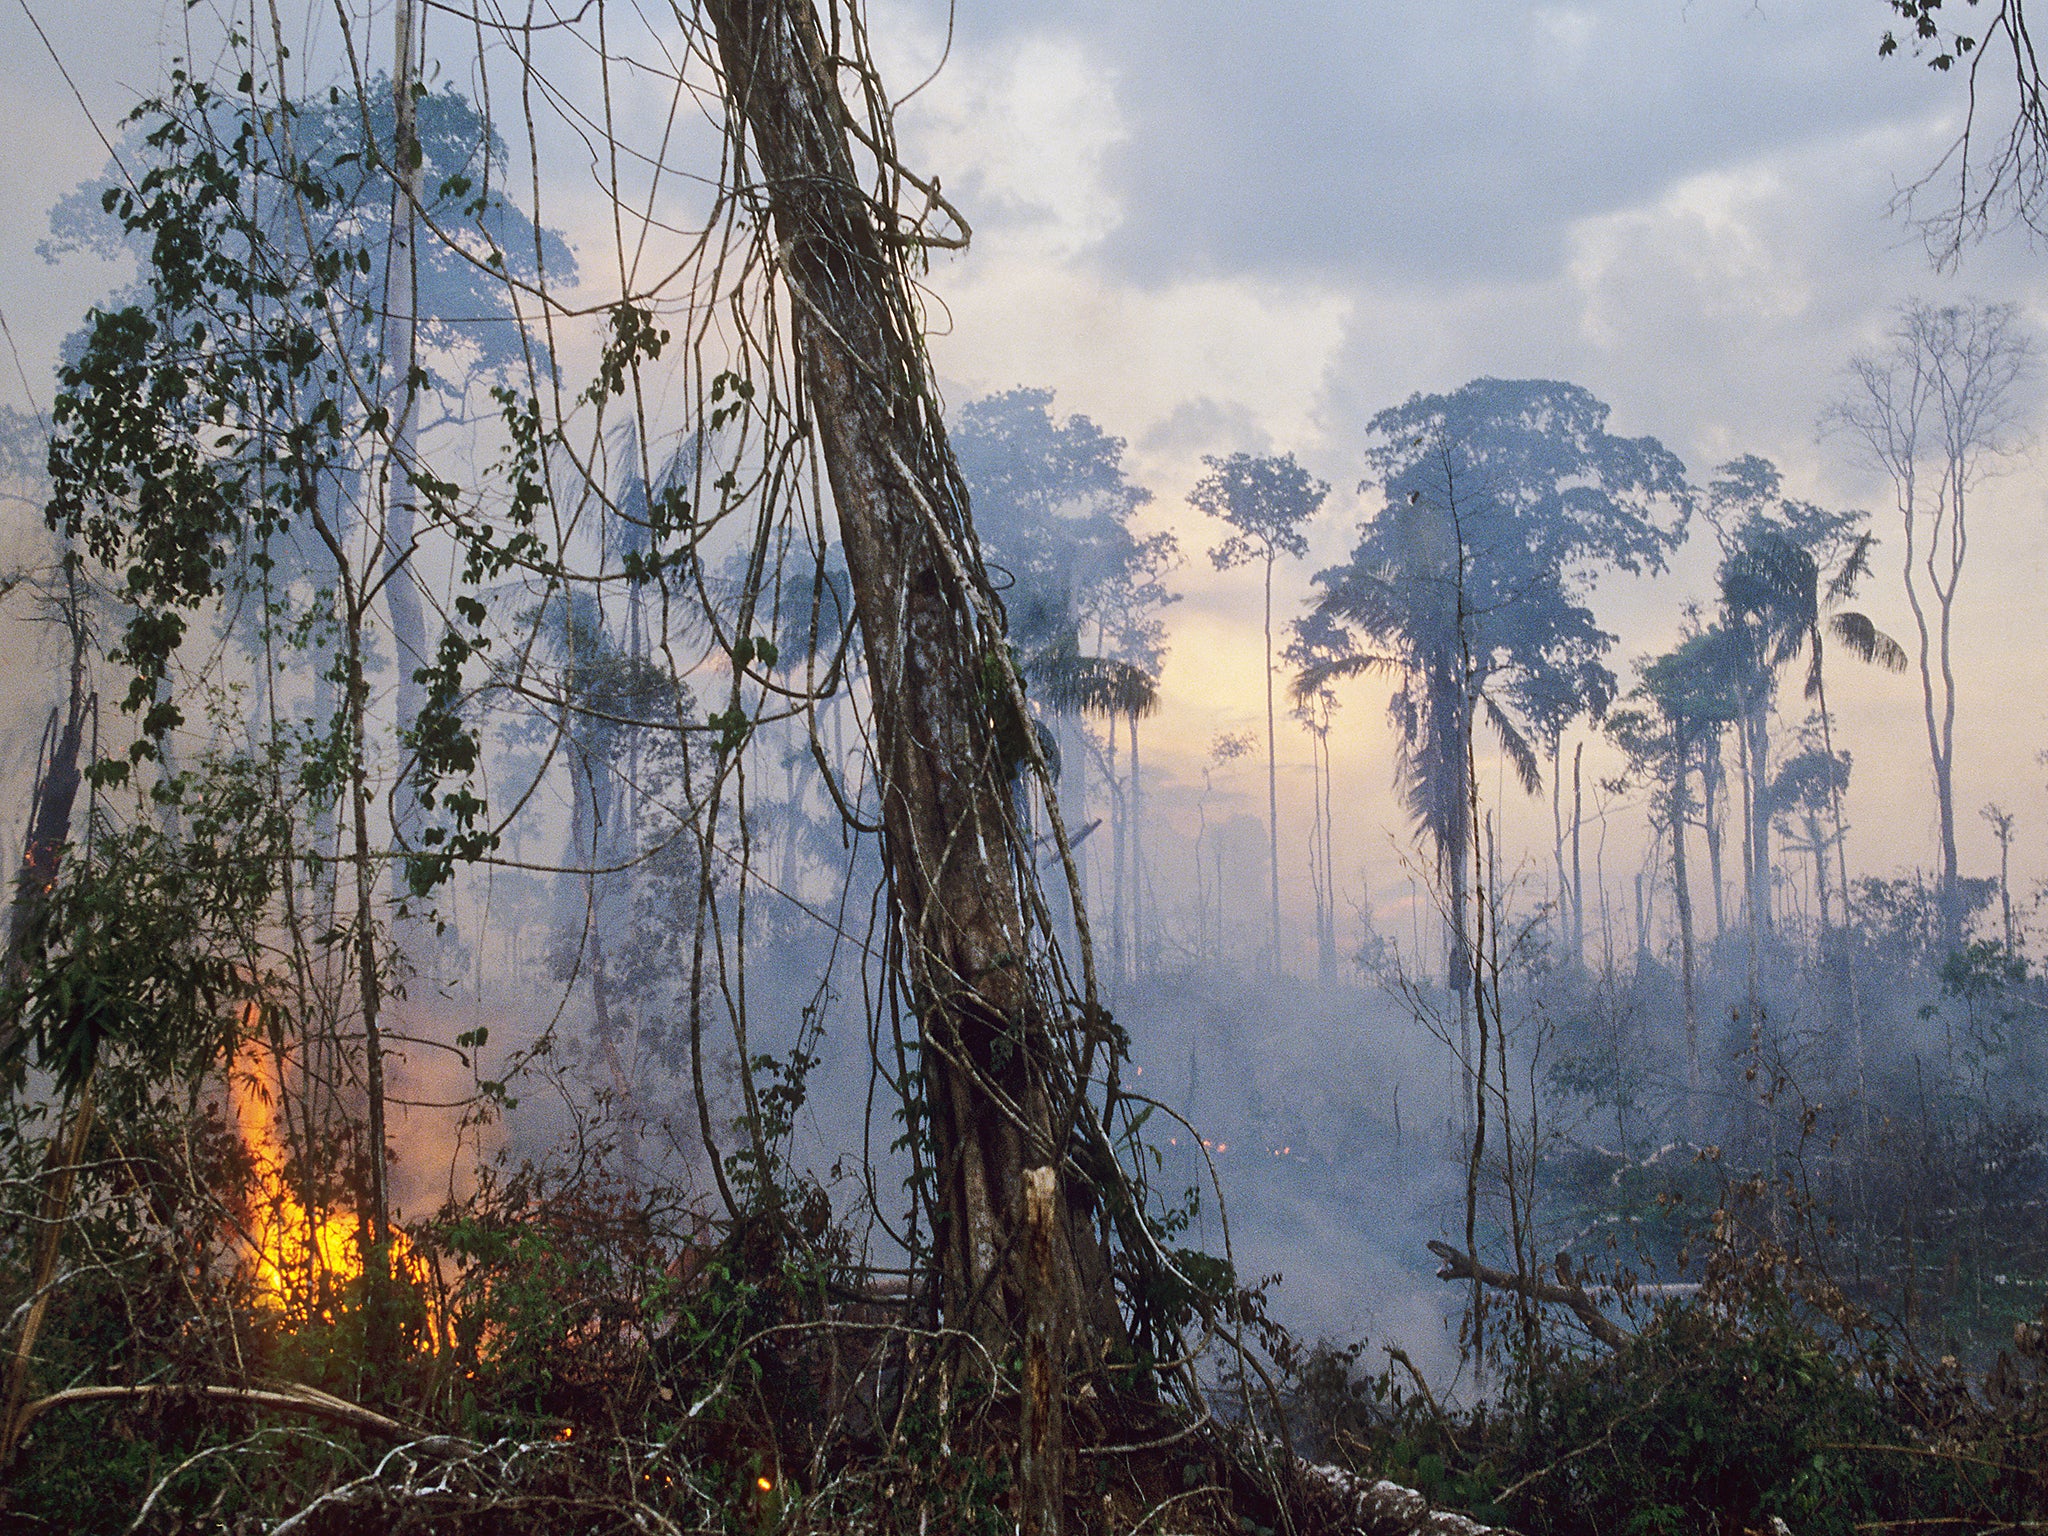 Slash and burn clearings are one of the many illegal activities targeted by GEF